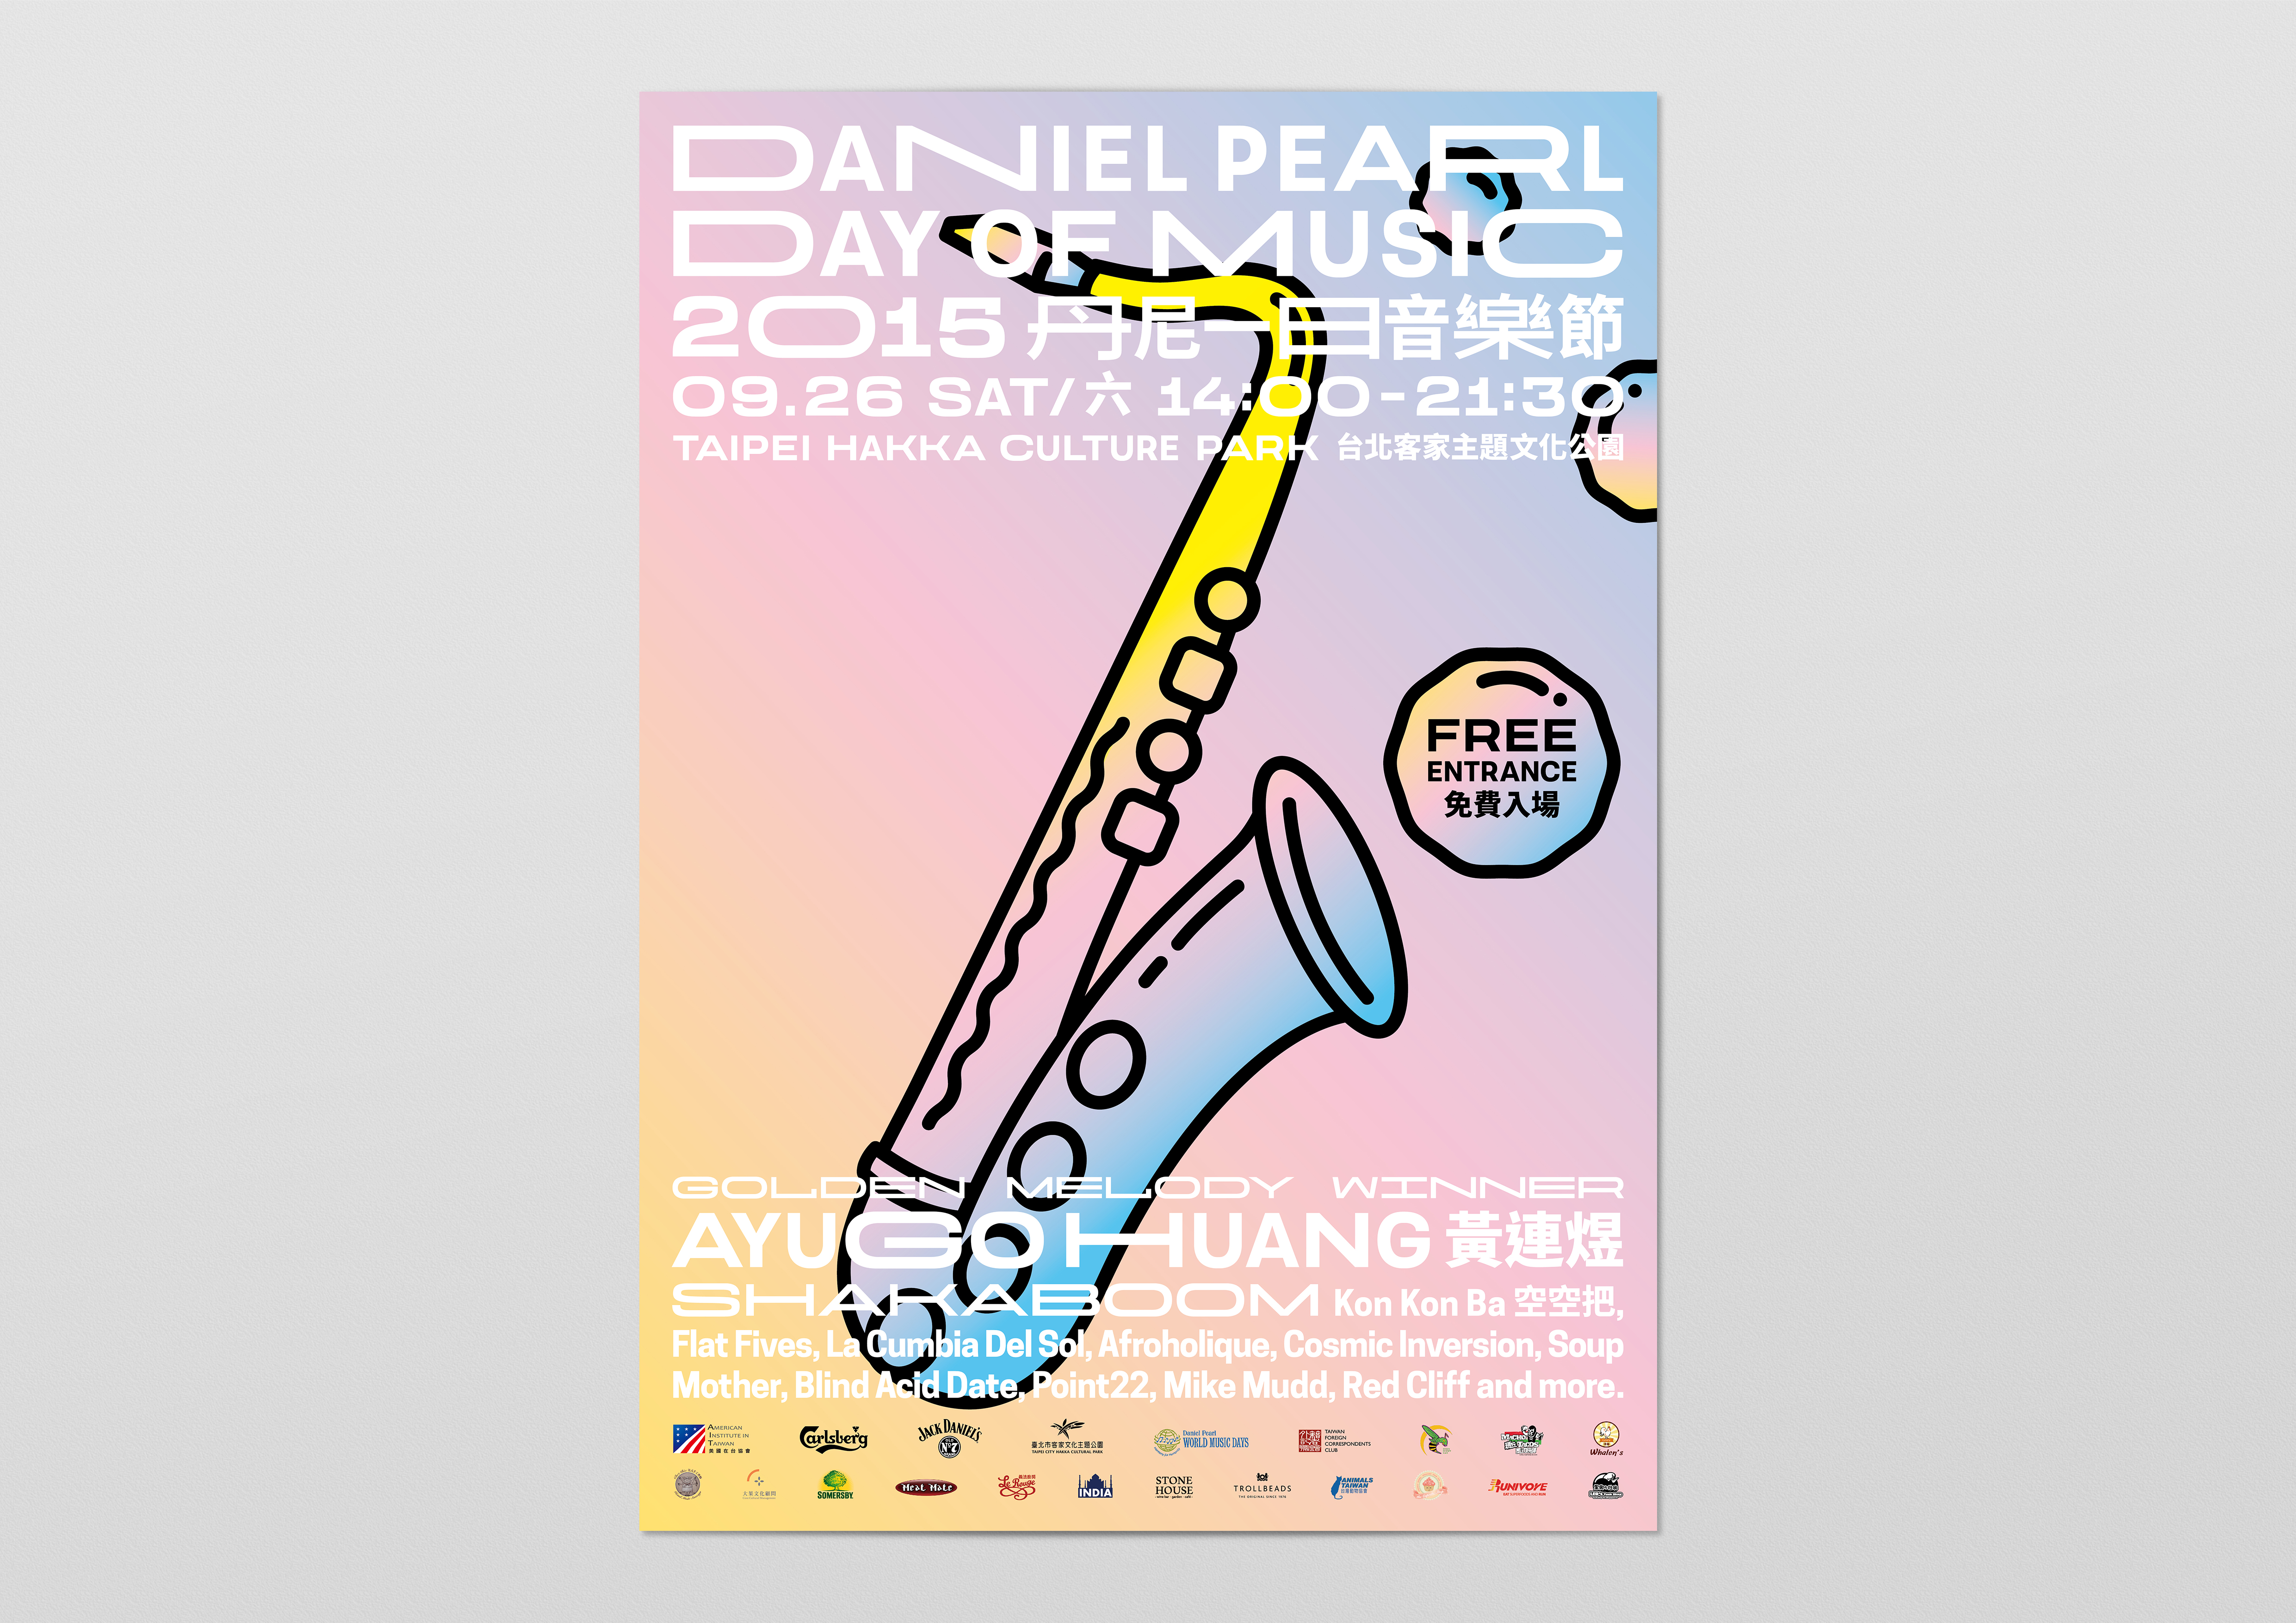 Daniel Pearl Day of Music, Image courtesy of Jay Guan-Jie Peng